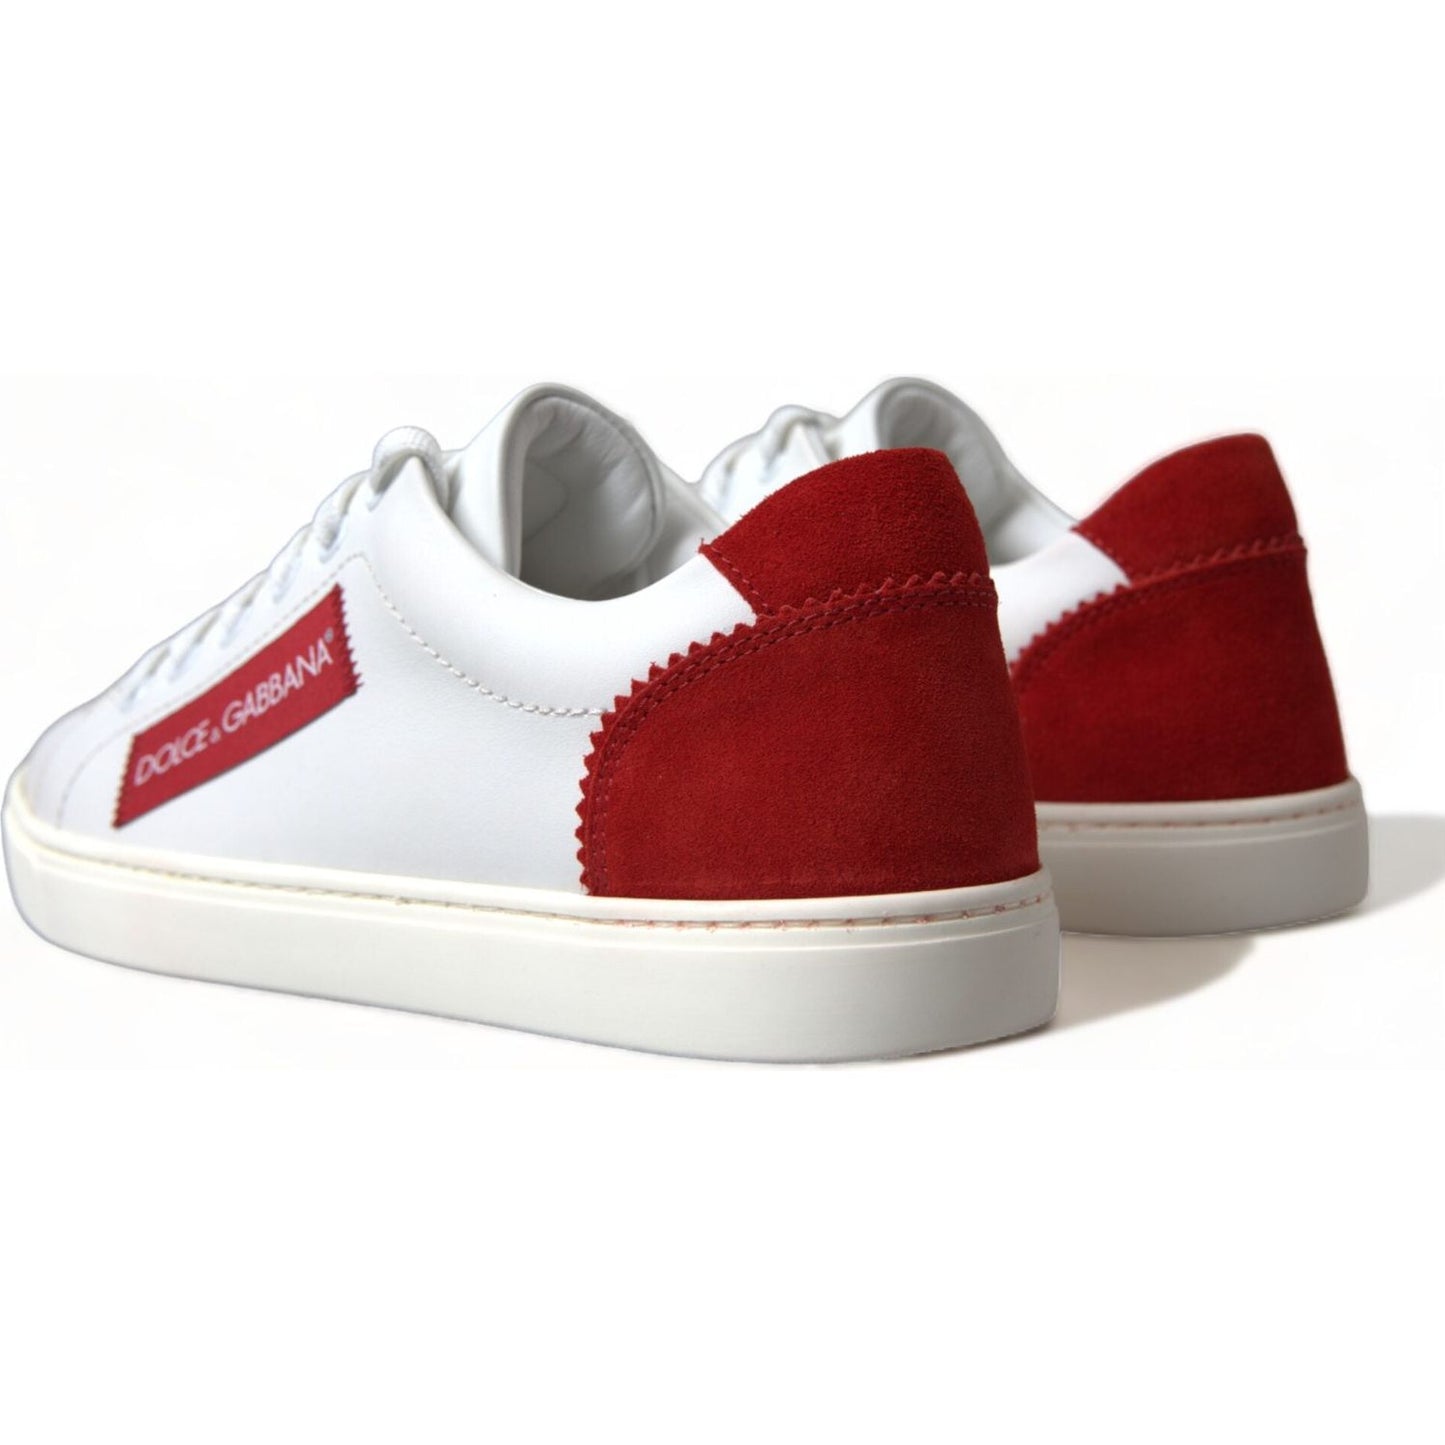 Dolce & Gabbana Chic White Leather Sneakers with Red Accents white-red-leather-low-top-sneakers-shoes